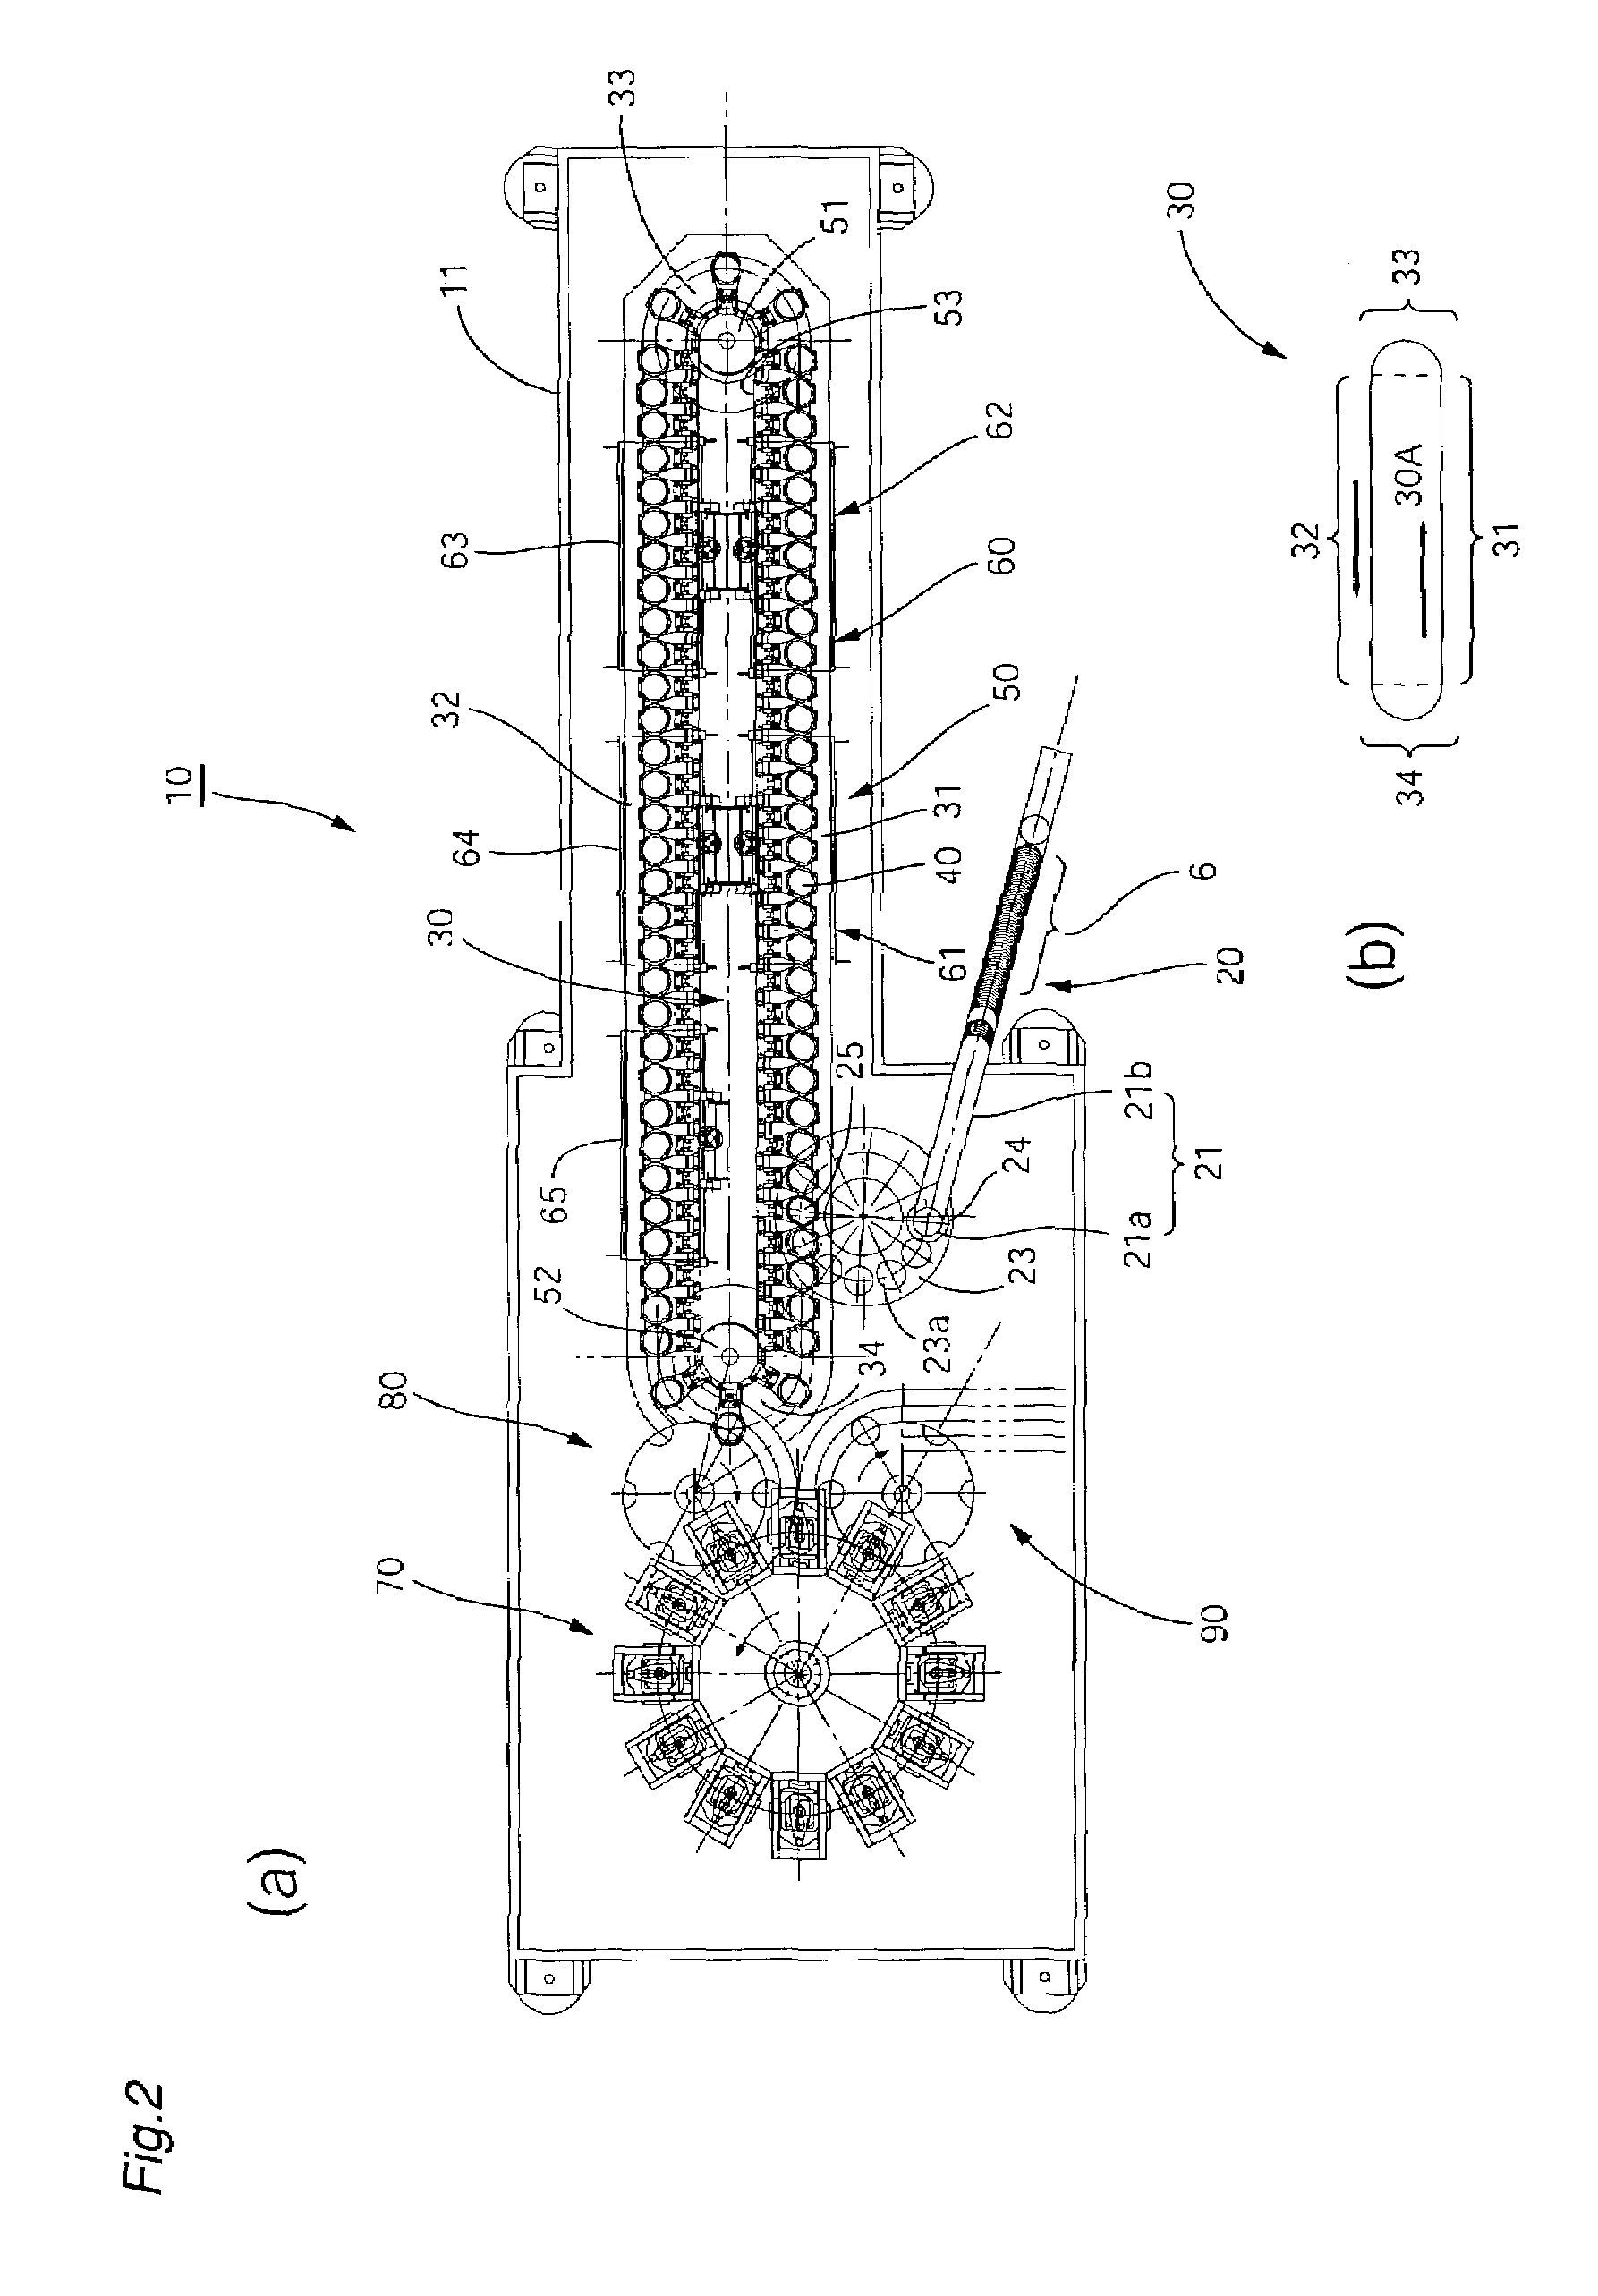 Biaxial stretch blow molding method and apparatus for wide-mouthed containers